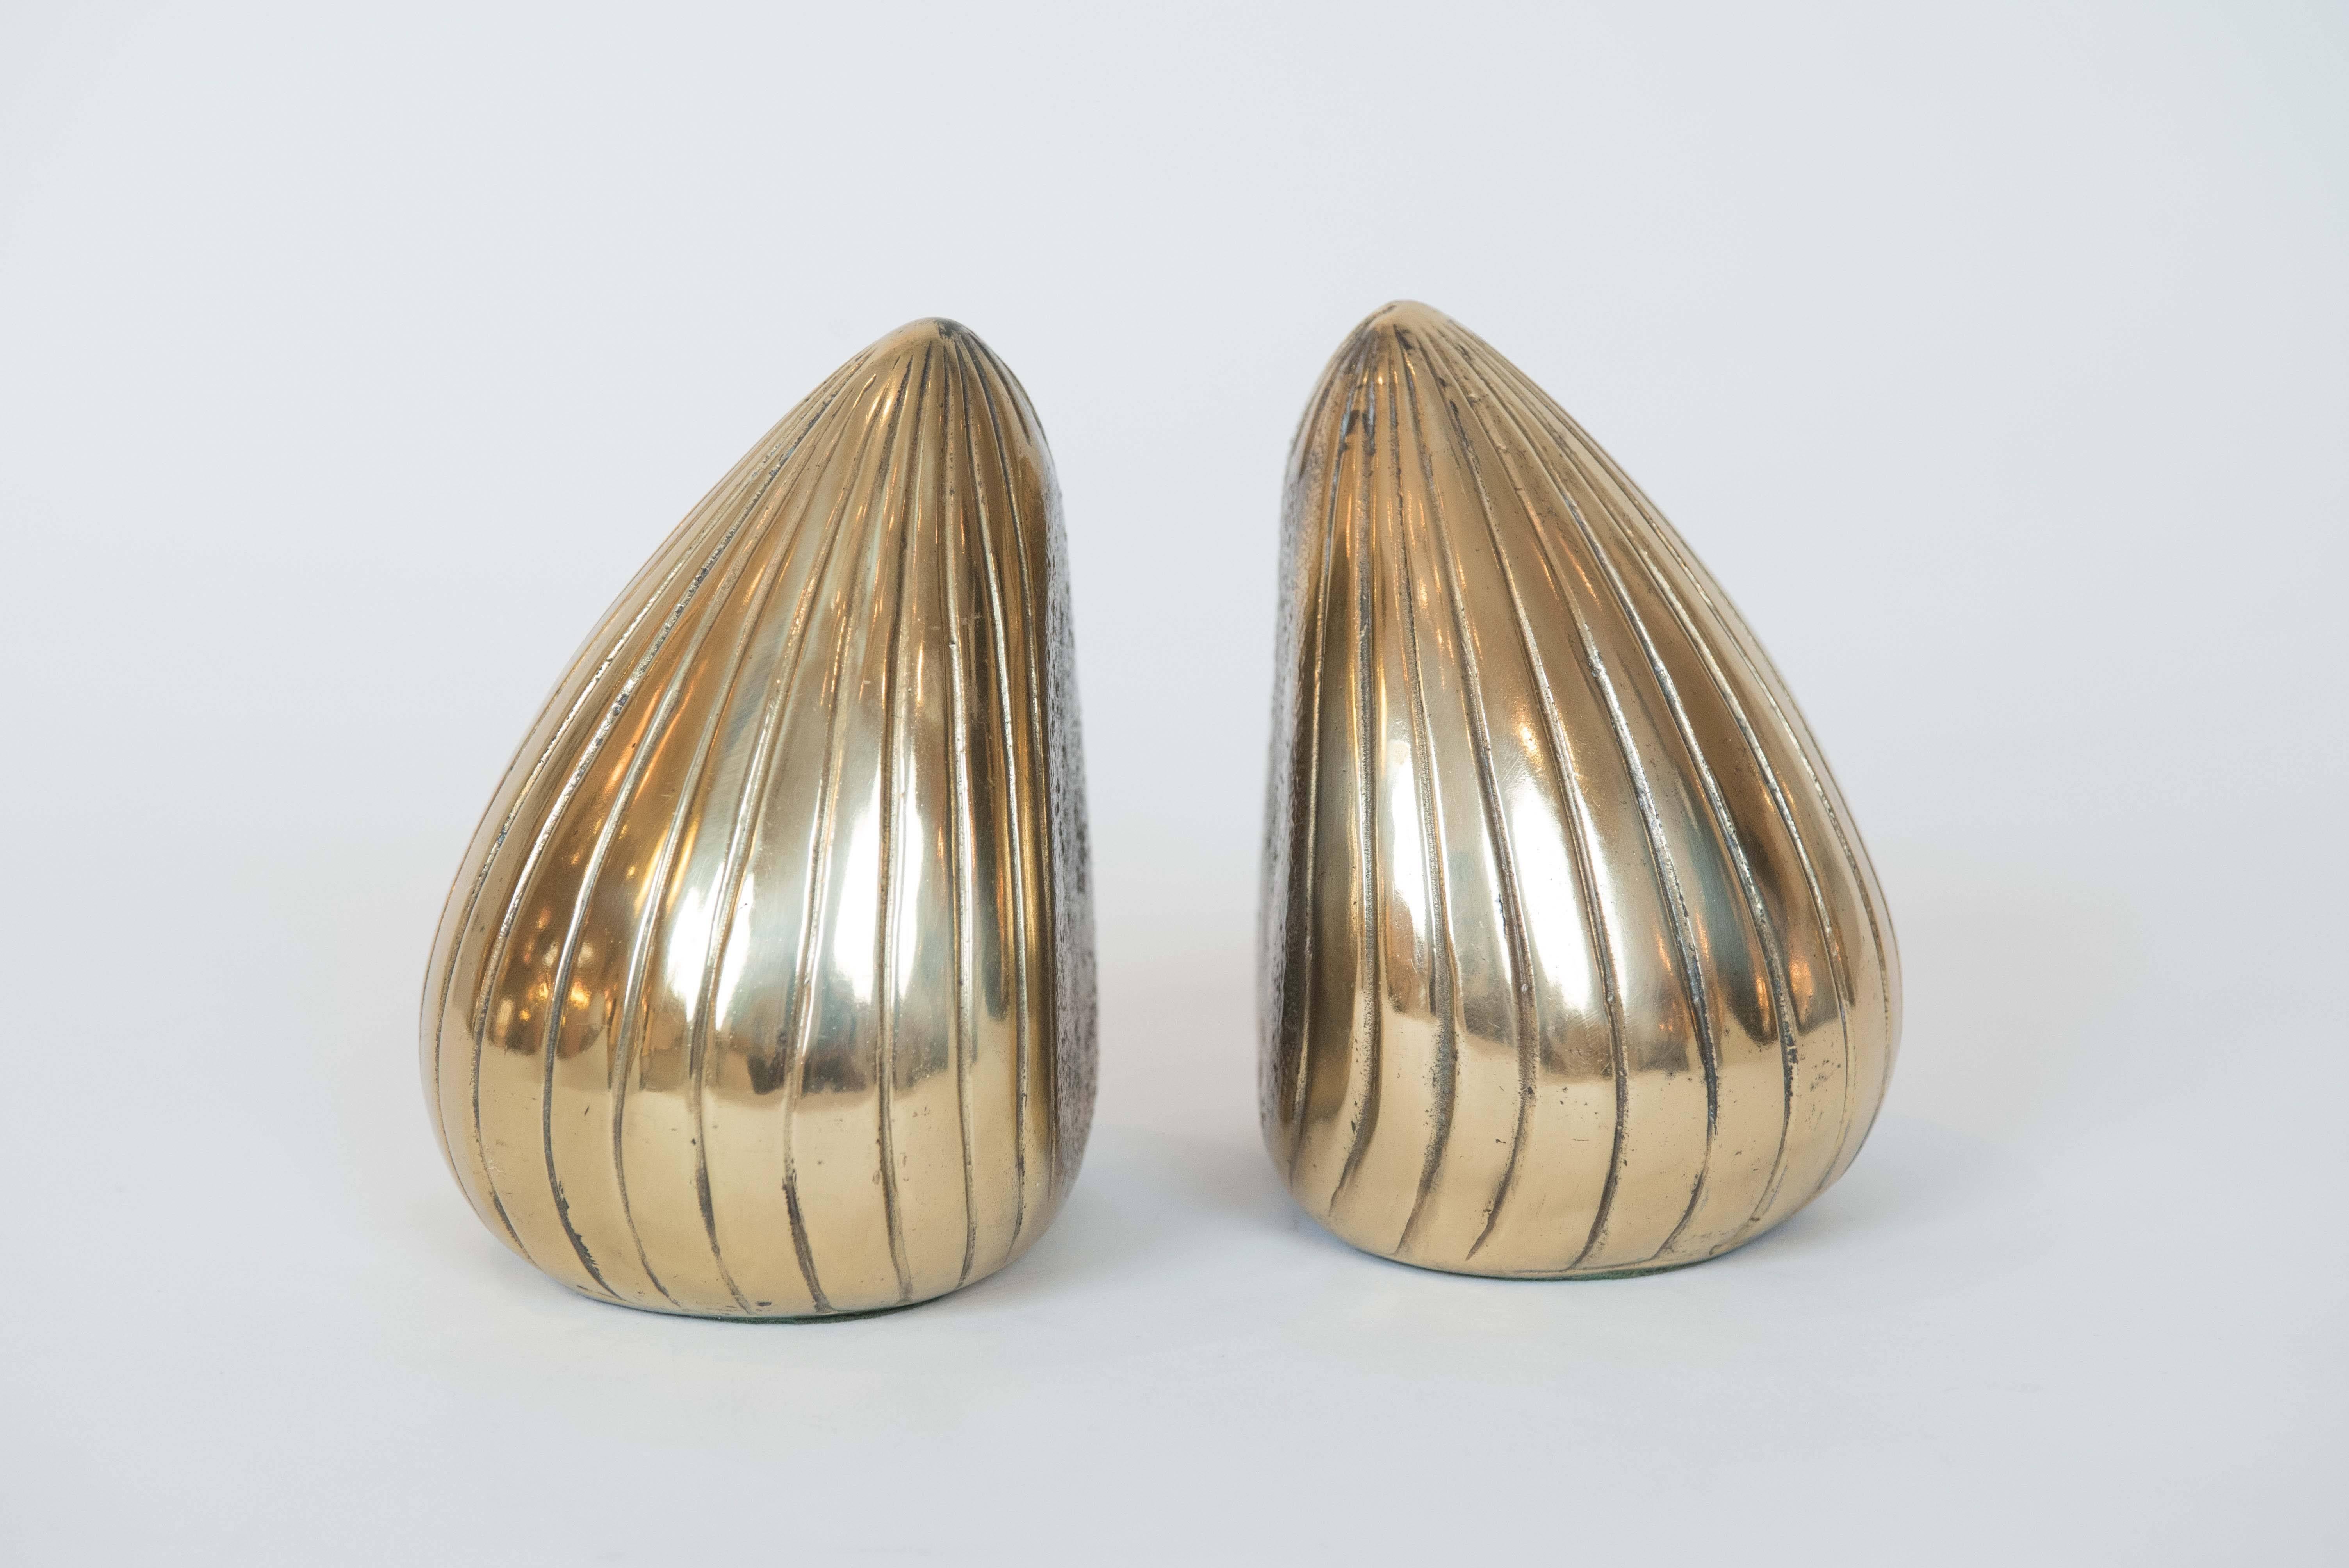 Pair of Brass Bookends by Ben Seibel for Jenfredware, New York 1